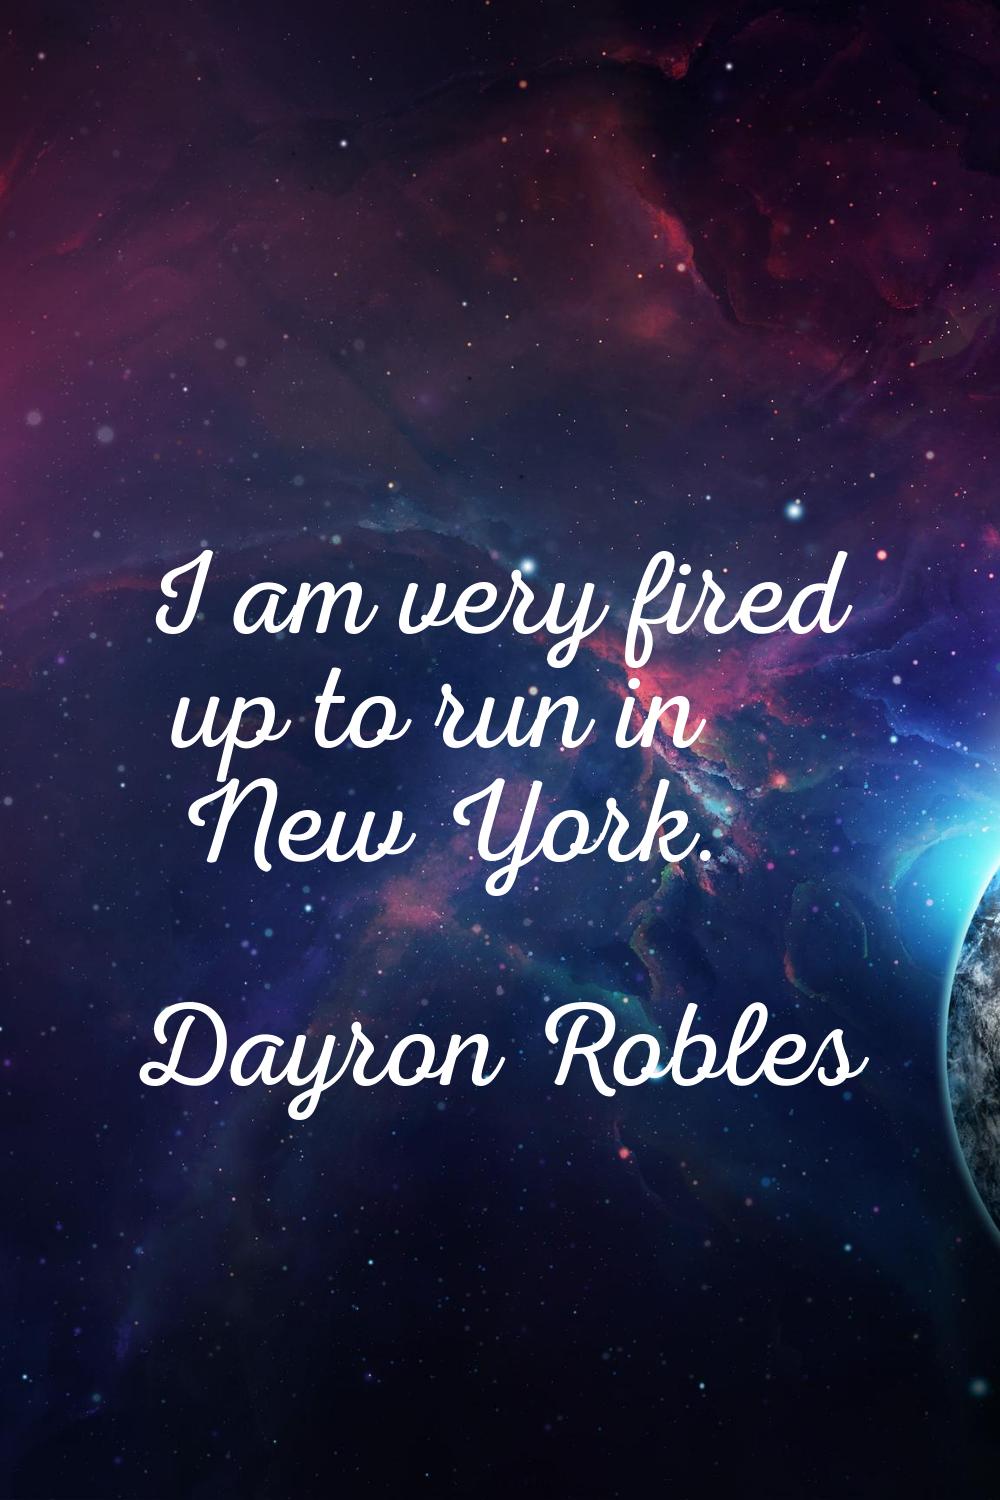 I am very fired up to run in New York.